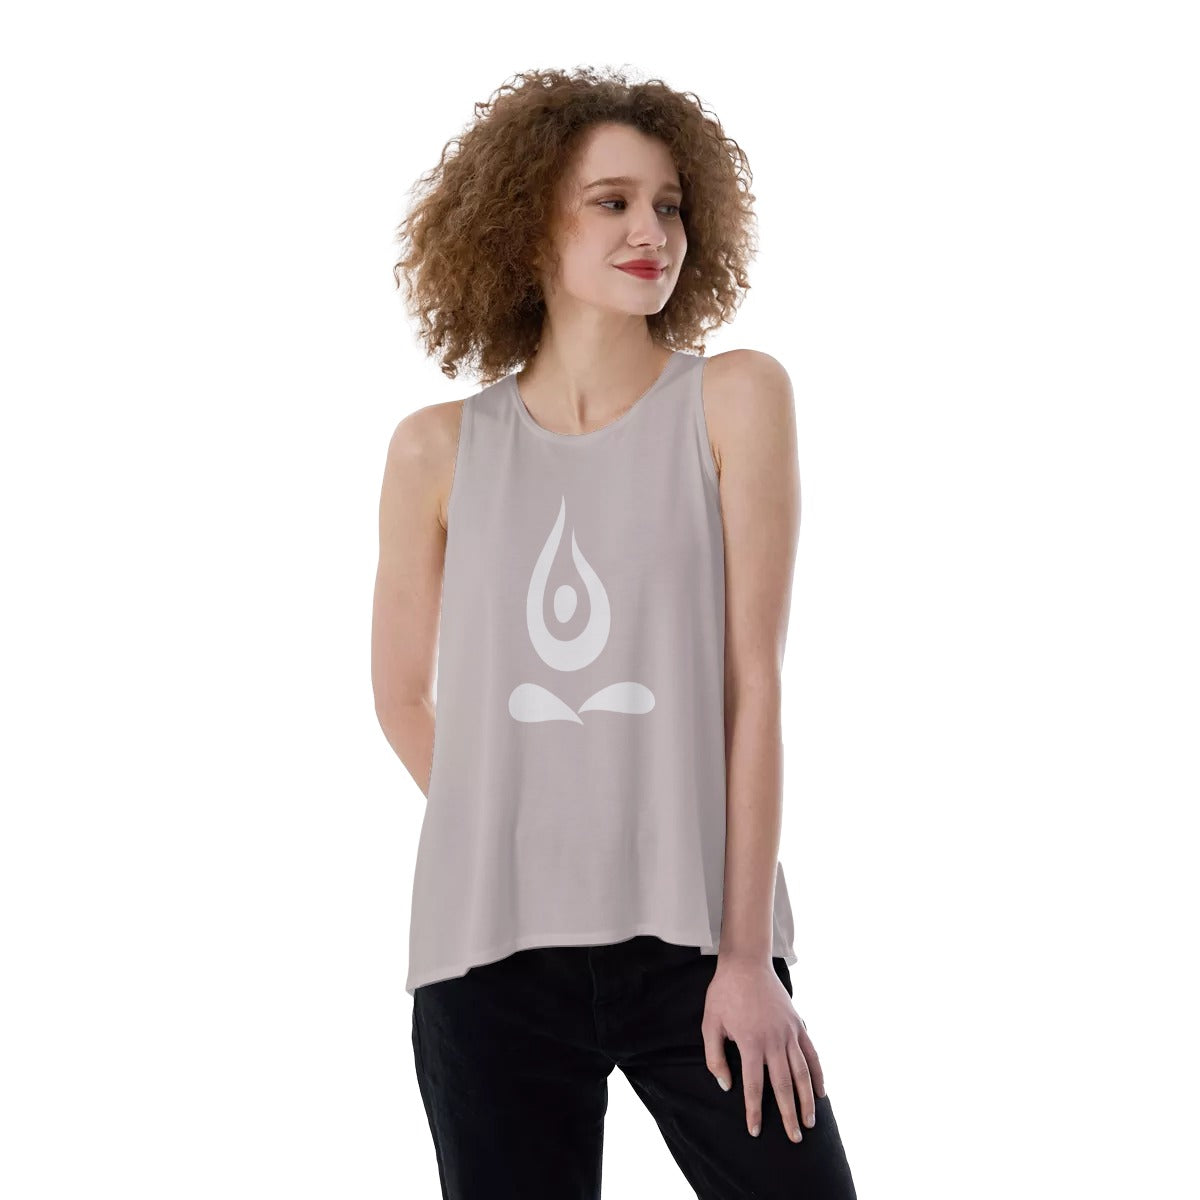 Loose Yoga Wear - Women's Loose Tank Yoga Top - Personal Hour for Yoga and Meditations 